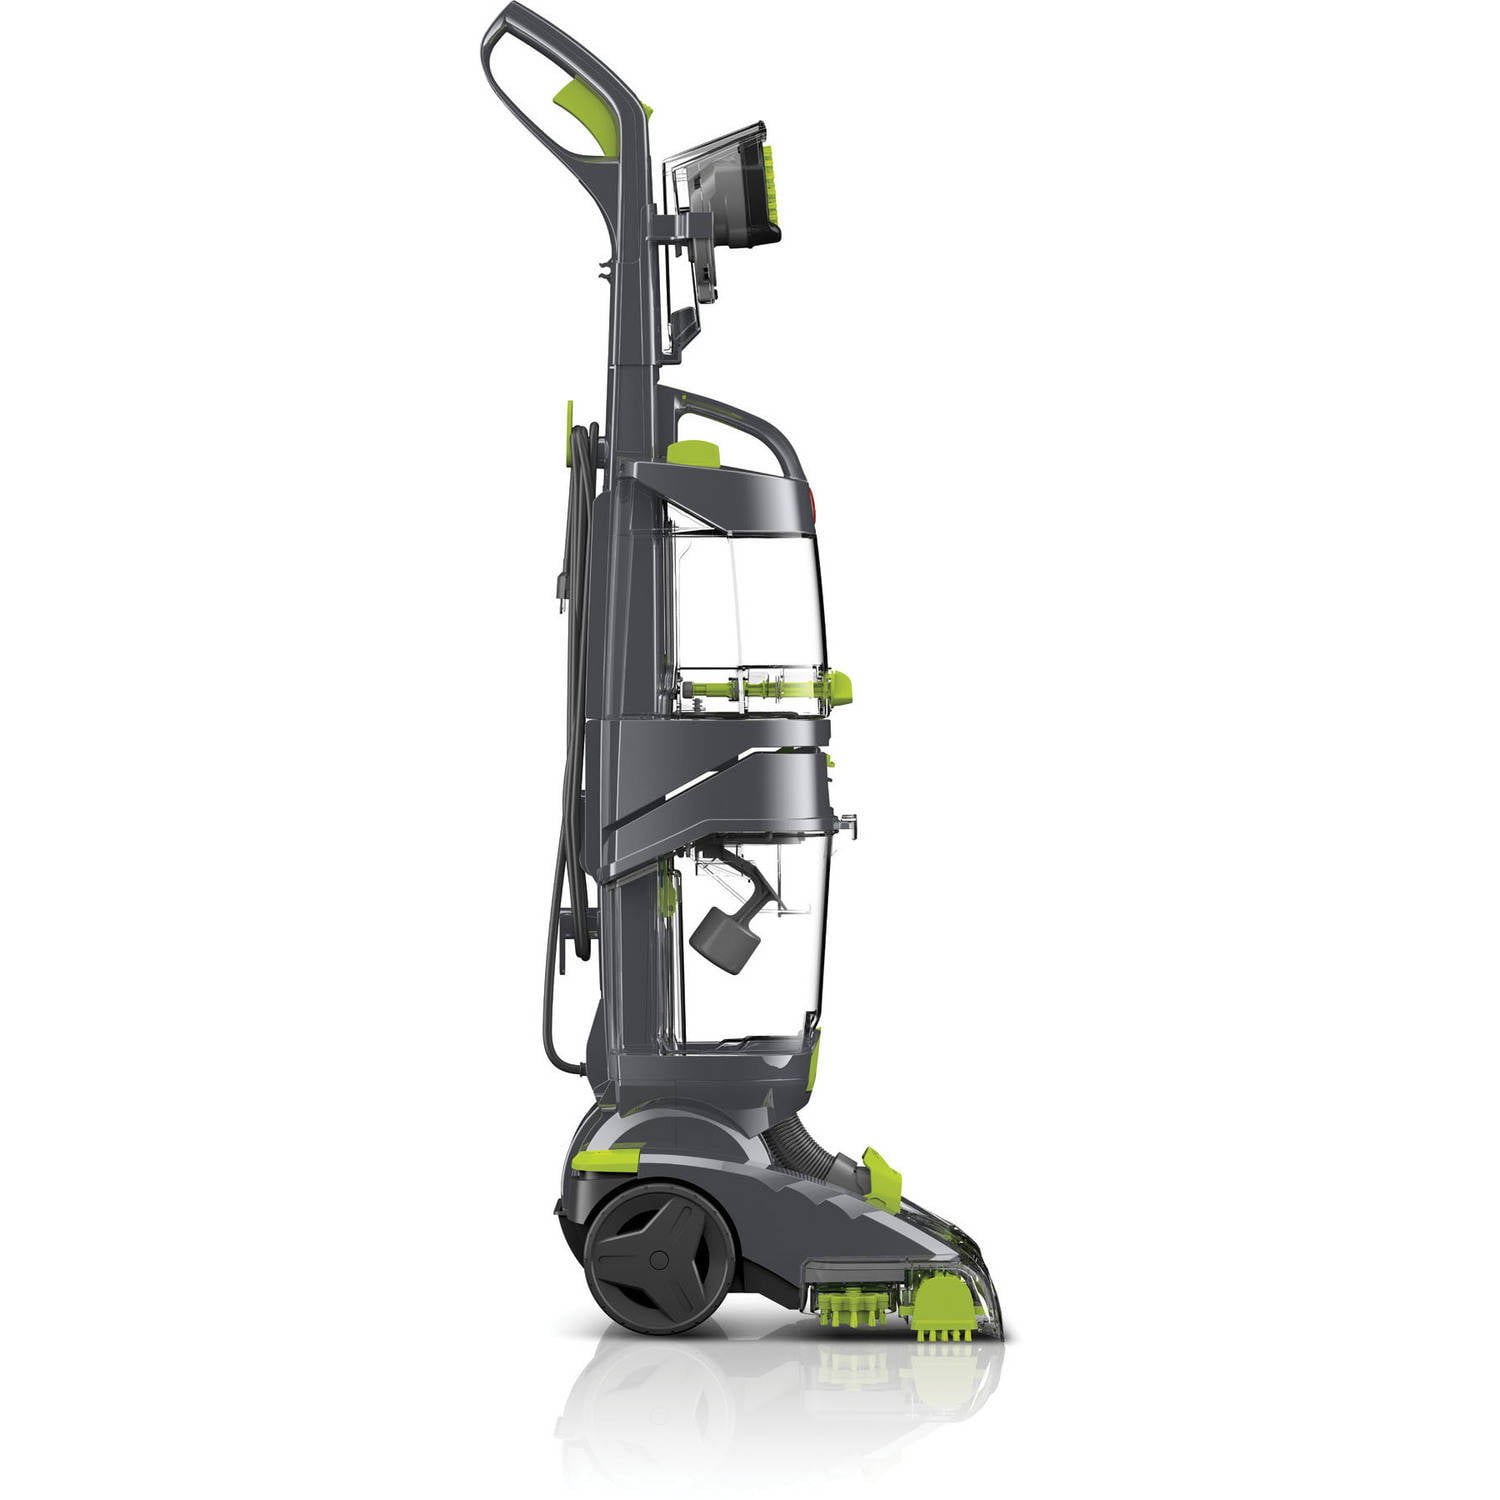 Hoover Dual Power Pro Carpet Washer Cleaner FH51200